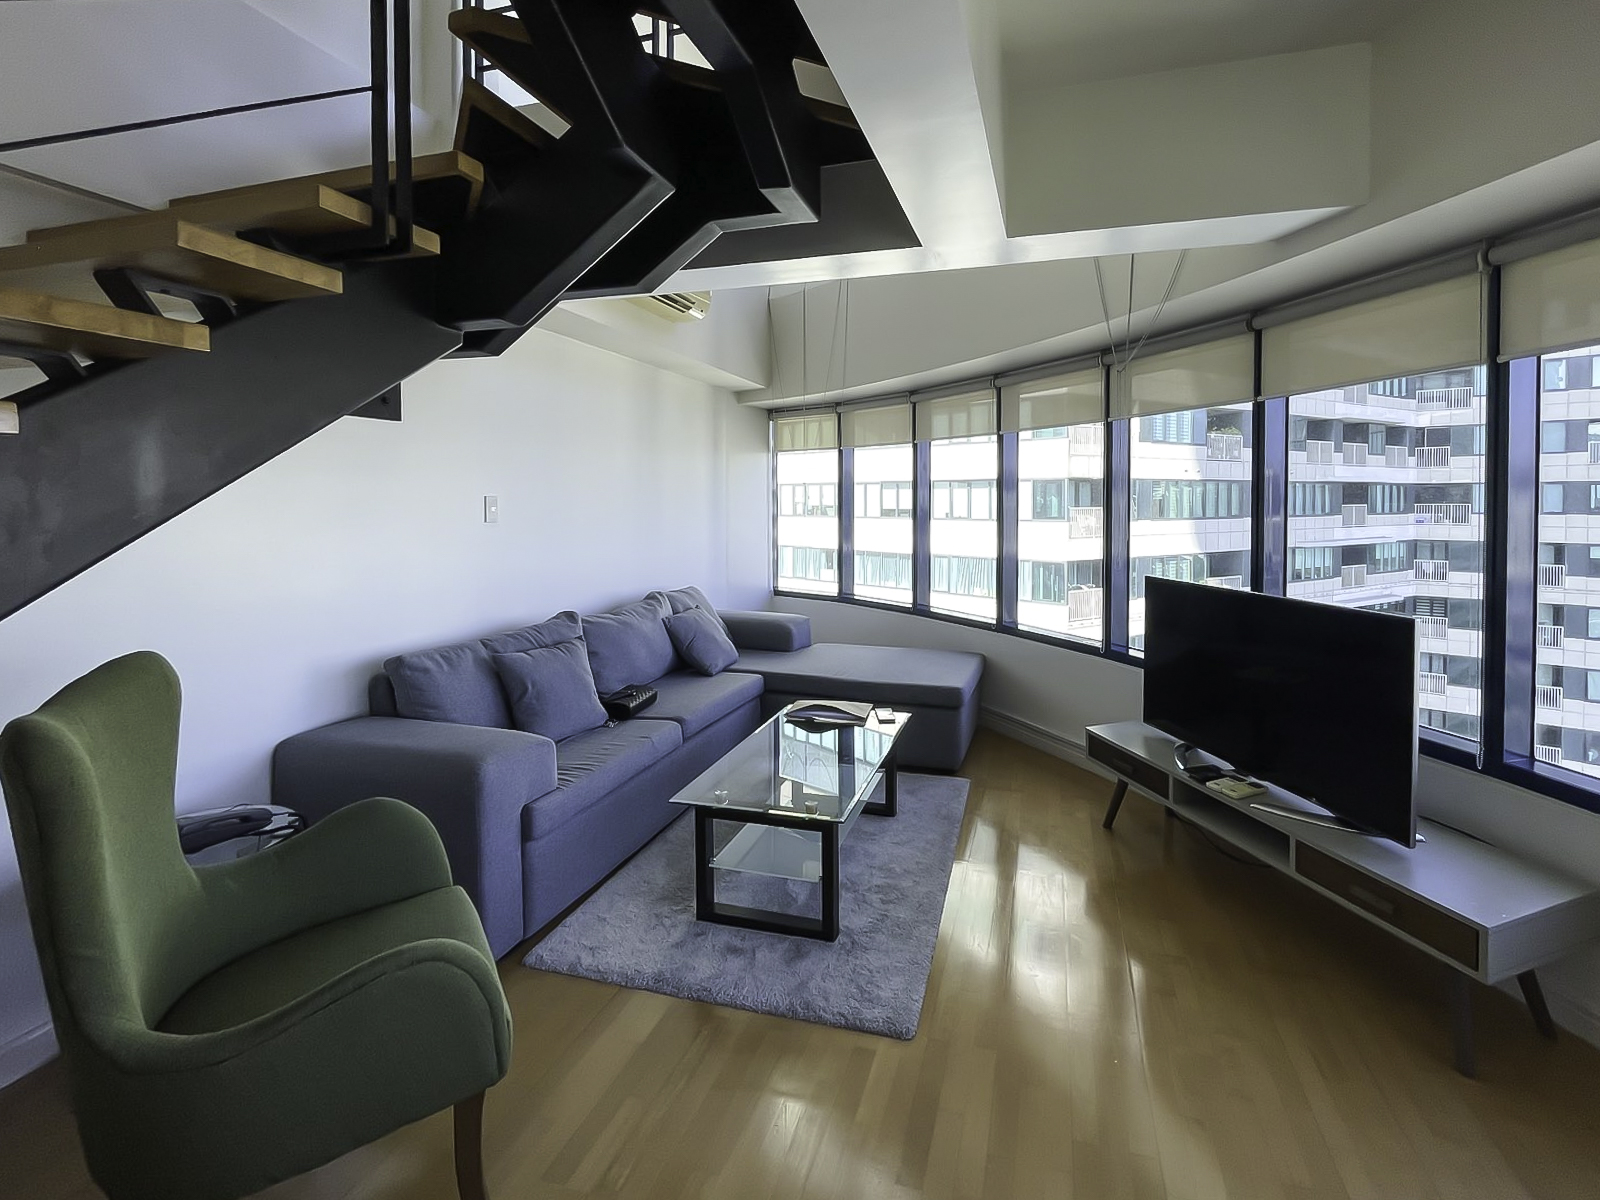 For Lease, 2BR Loft Type Condominium in One Rockwell, Makati City